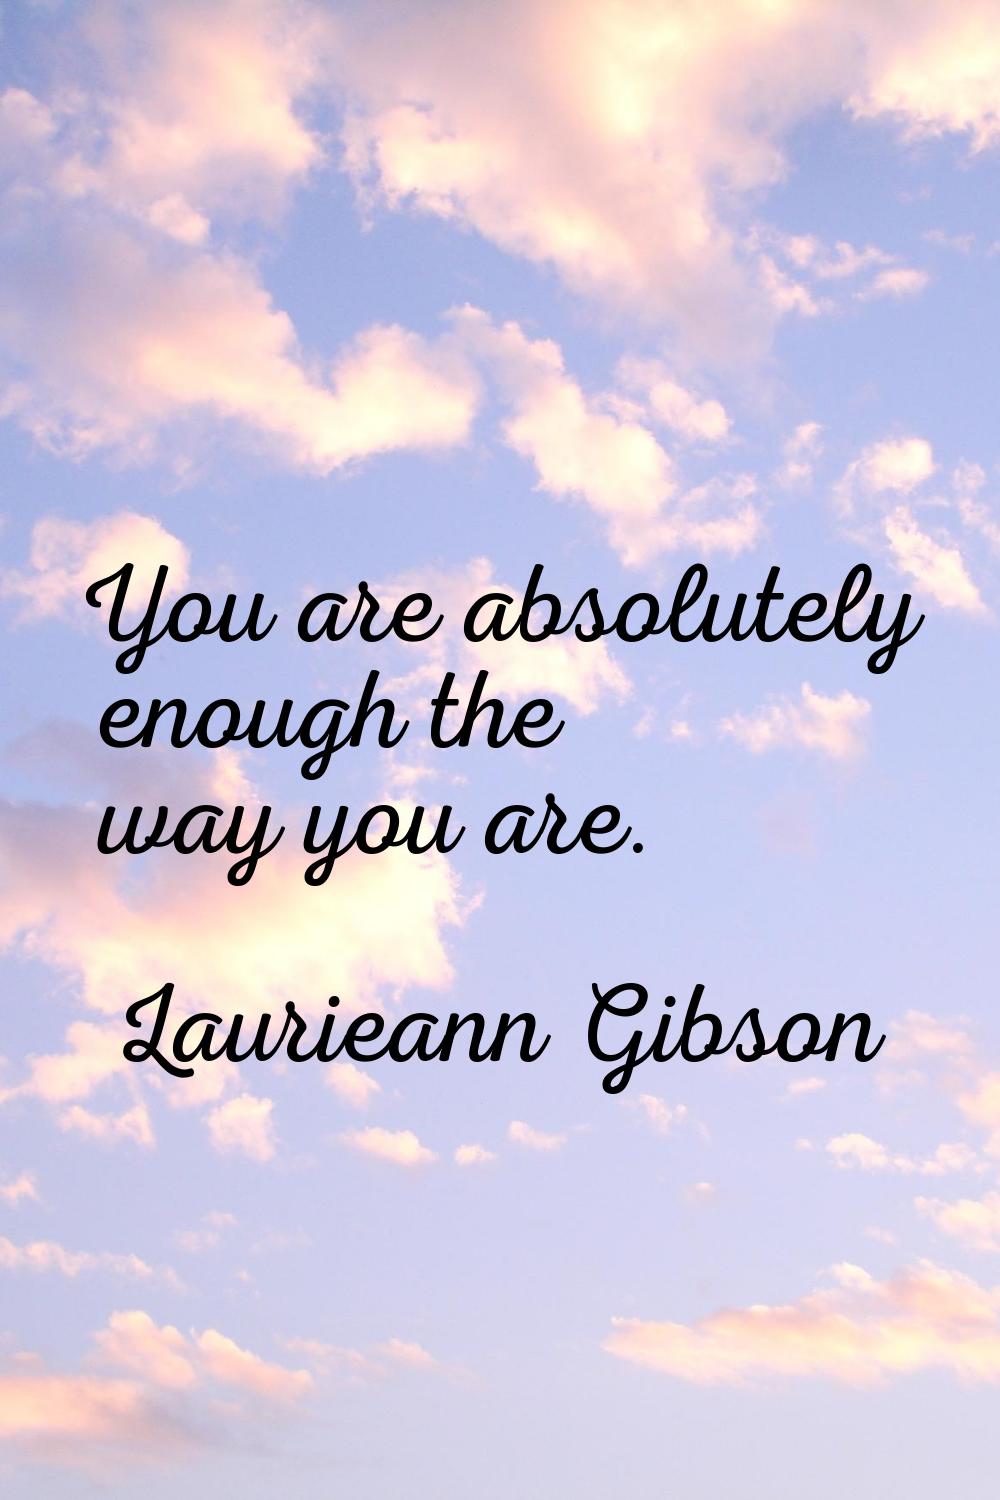 You are absolutely enough the way you are.